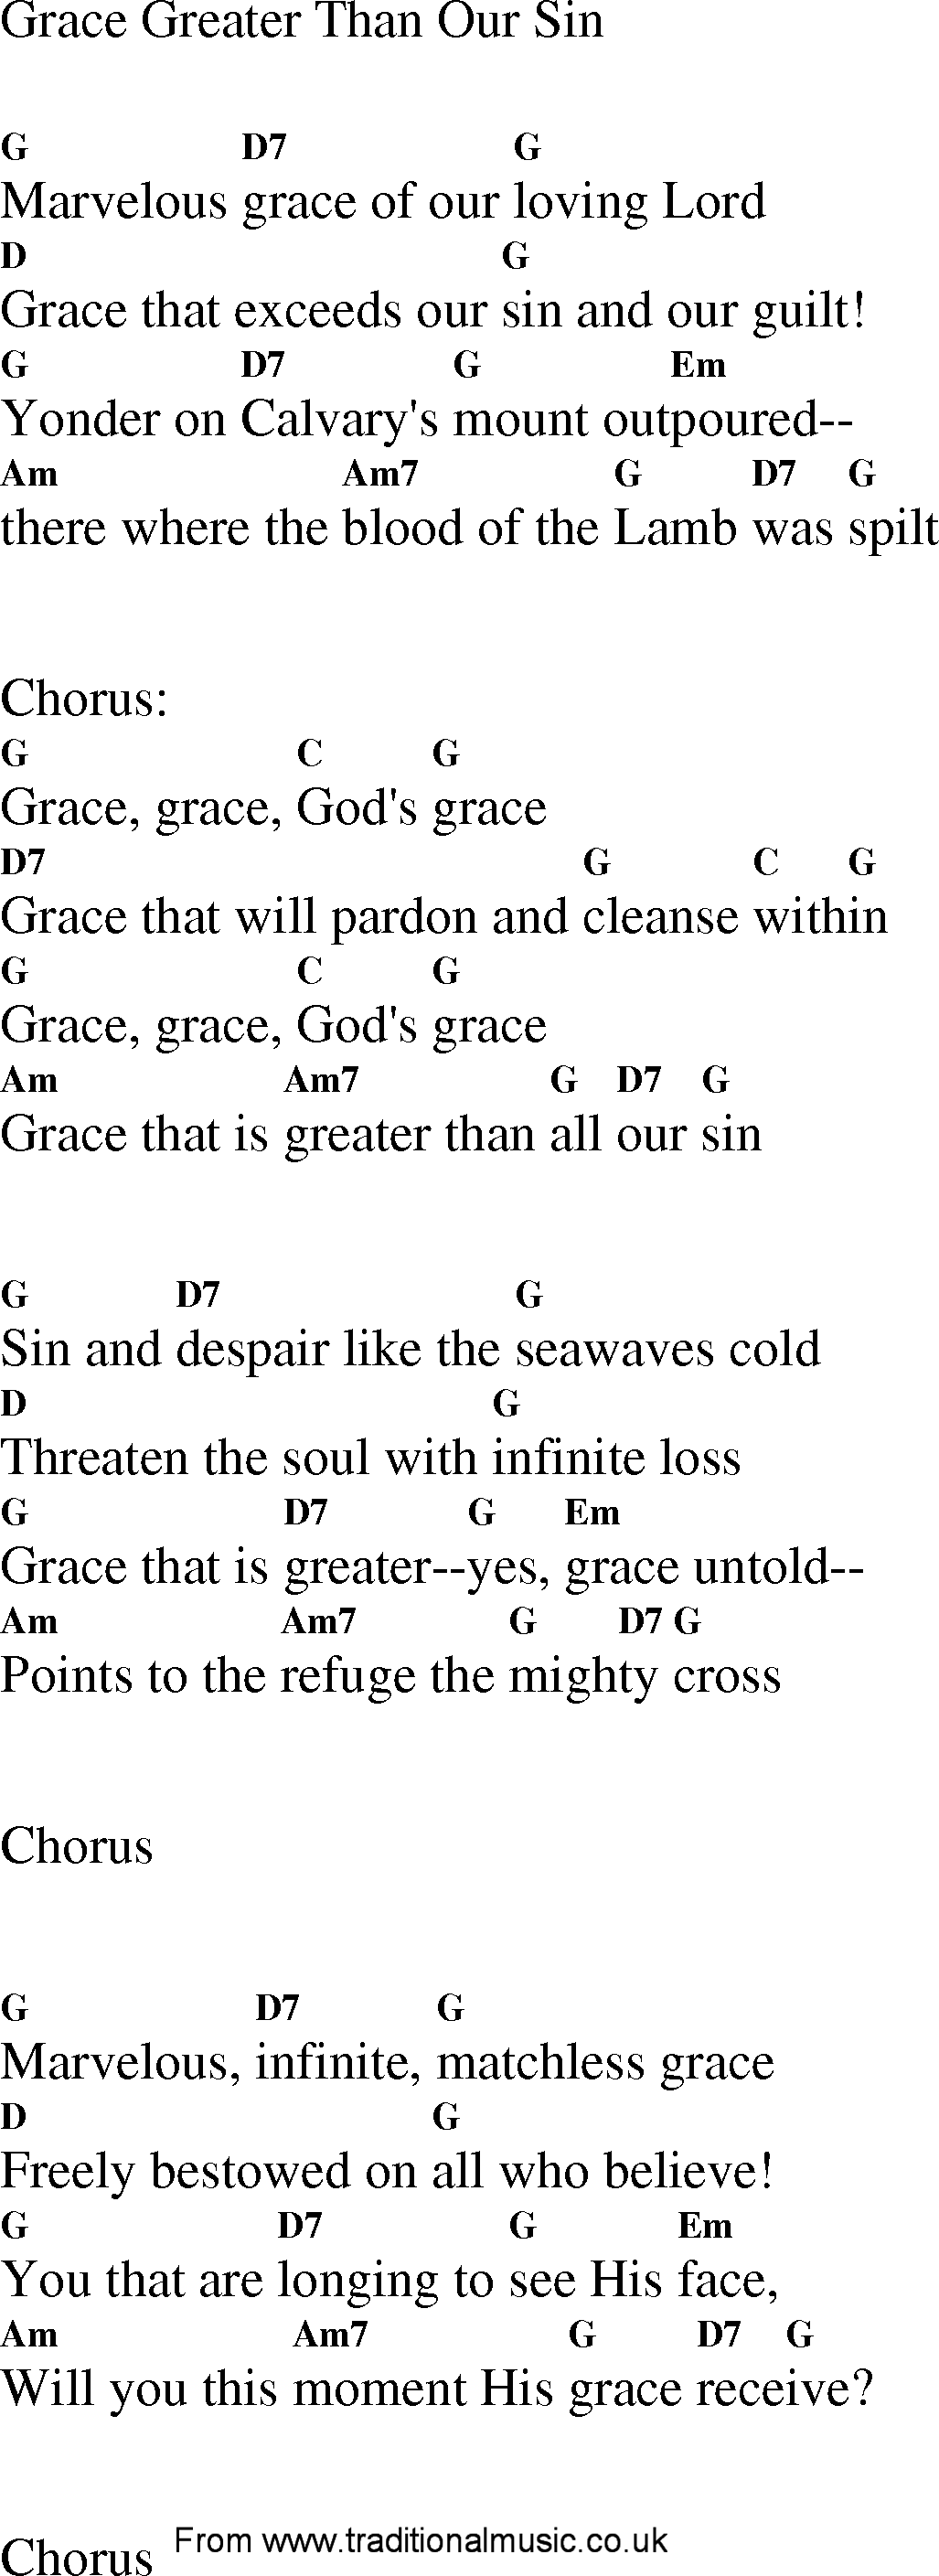 Gospel Song: grace_greater_than_our_sin, lyrics and chords.